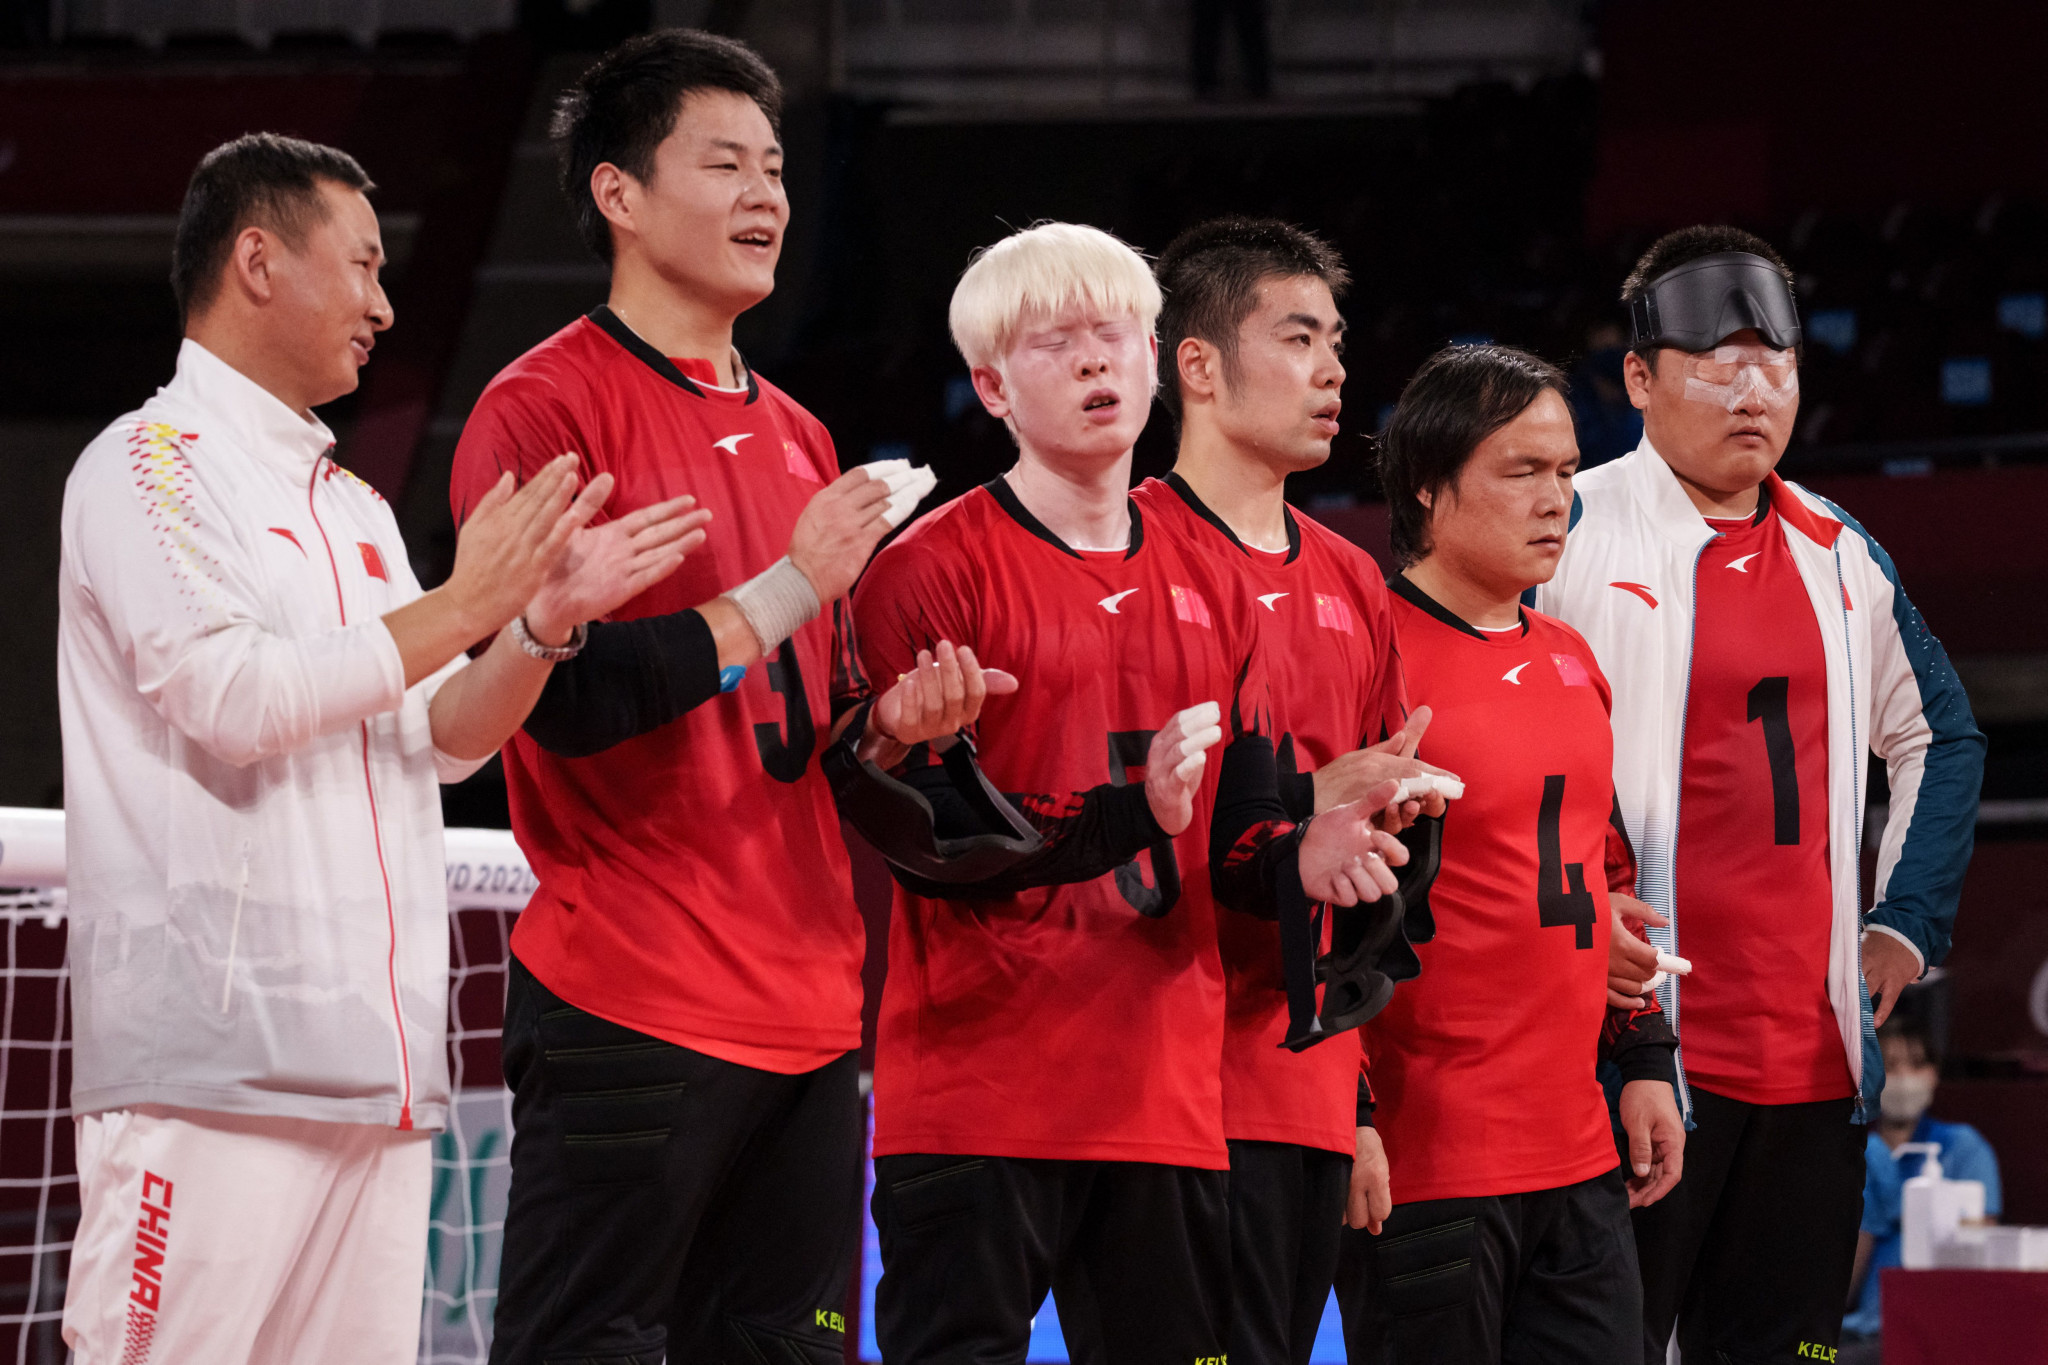 Tokyo 2020 silver medallists China will have to wait until 2022 to compete in the 2021 Asia-Pacific Goalball Championships ©Getty Images